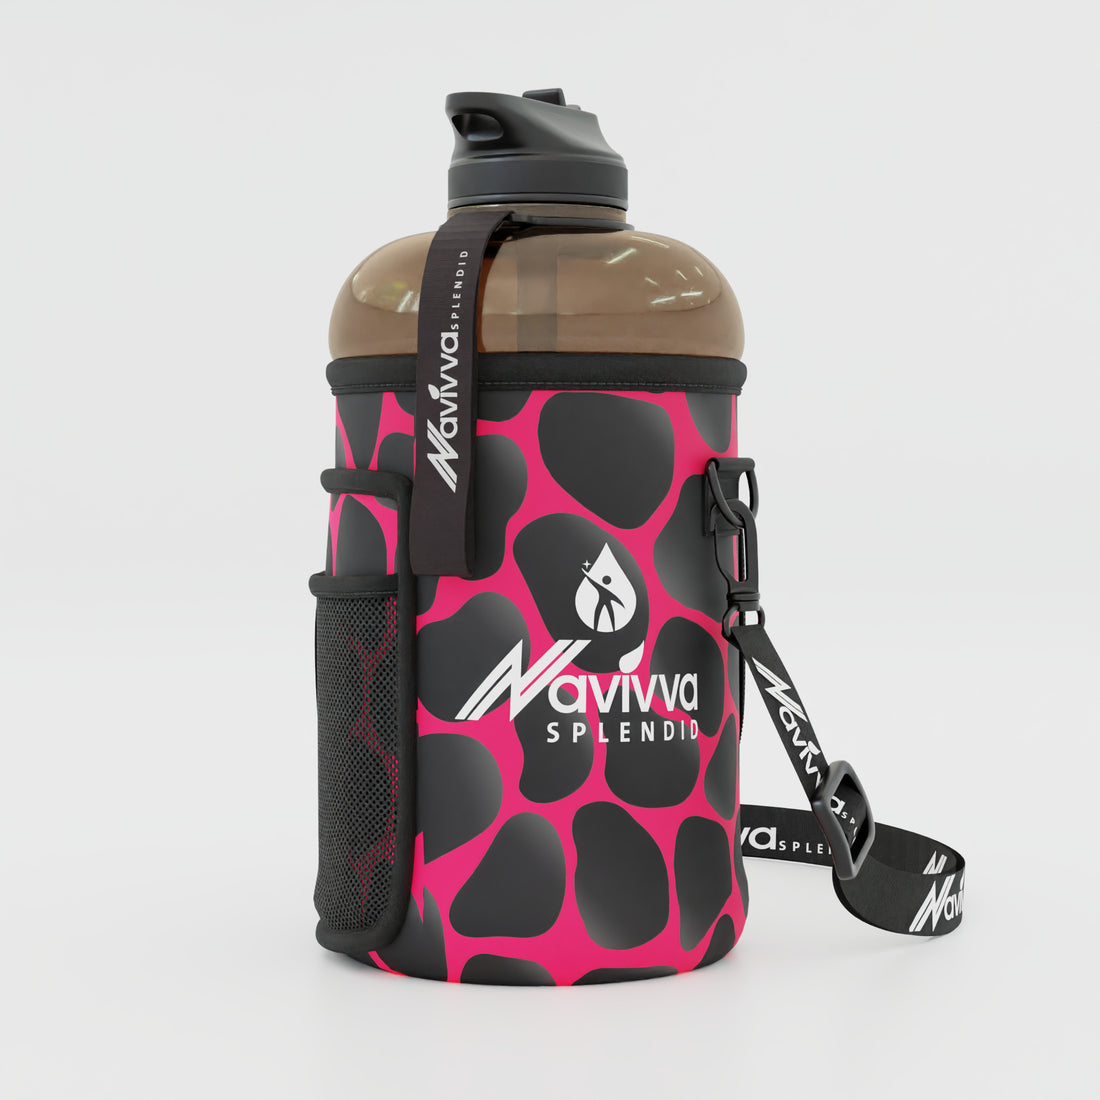 Big water bottle with sleeve - pink